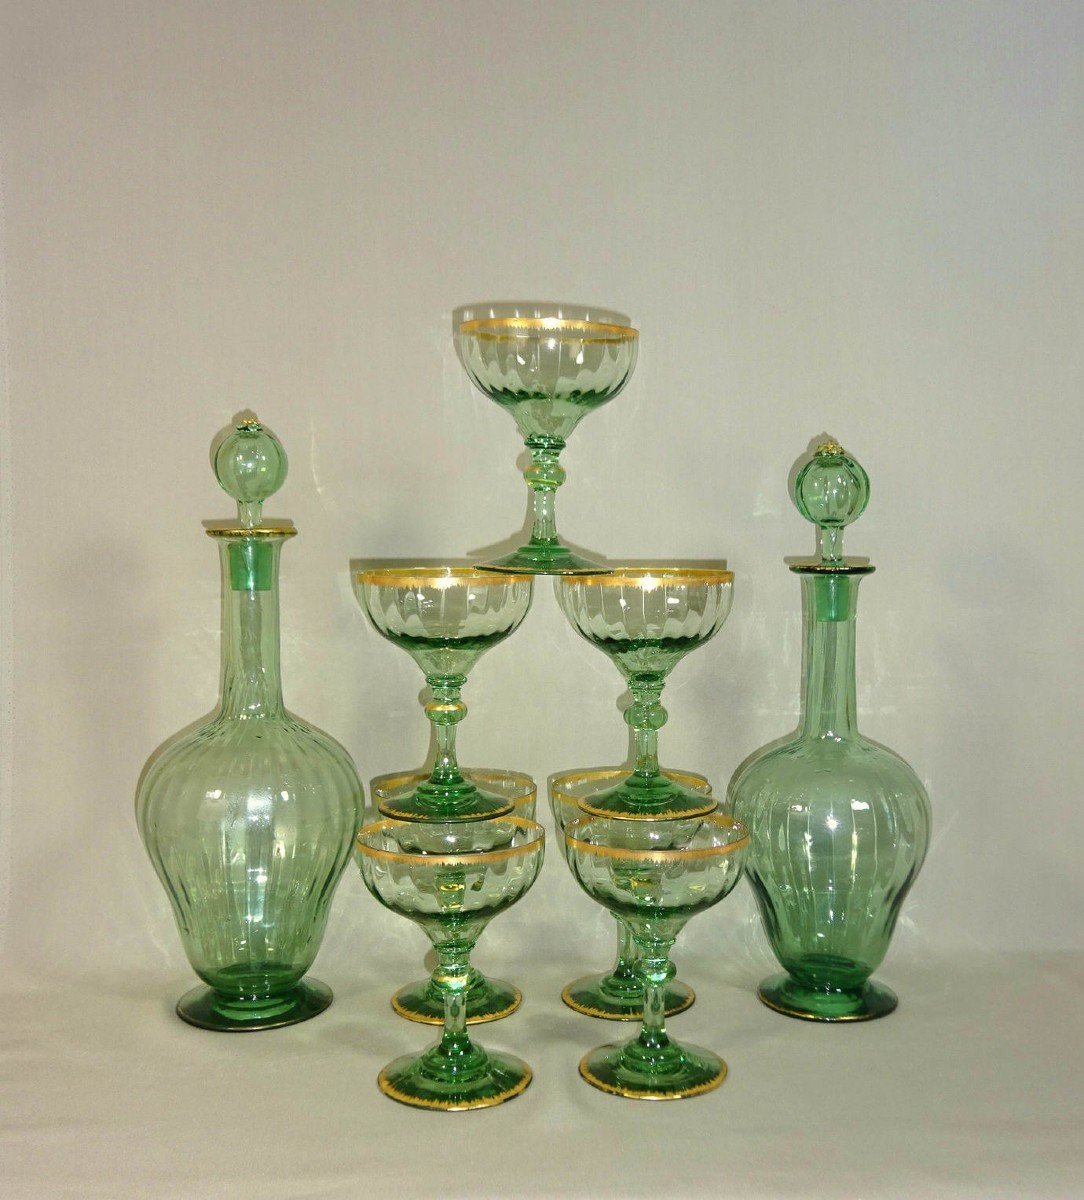 Daum  Art Nouveau Period, Carafes And Glasses Blown And Gilded, To Be Compared To The Au Gui Model By Lachenal & Daum-photo-1